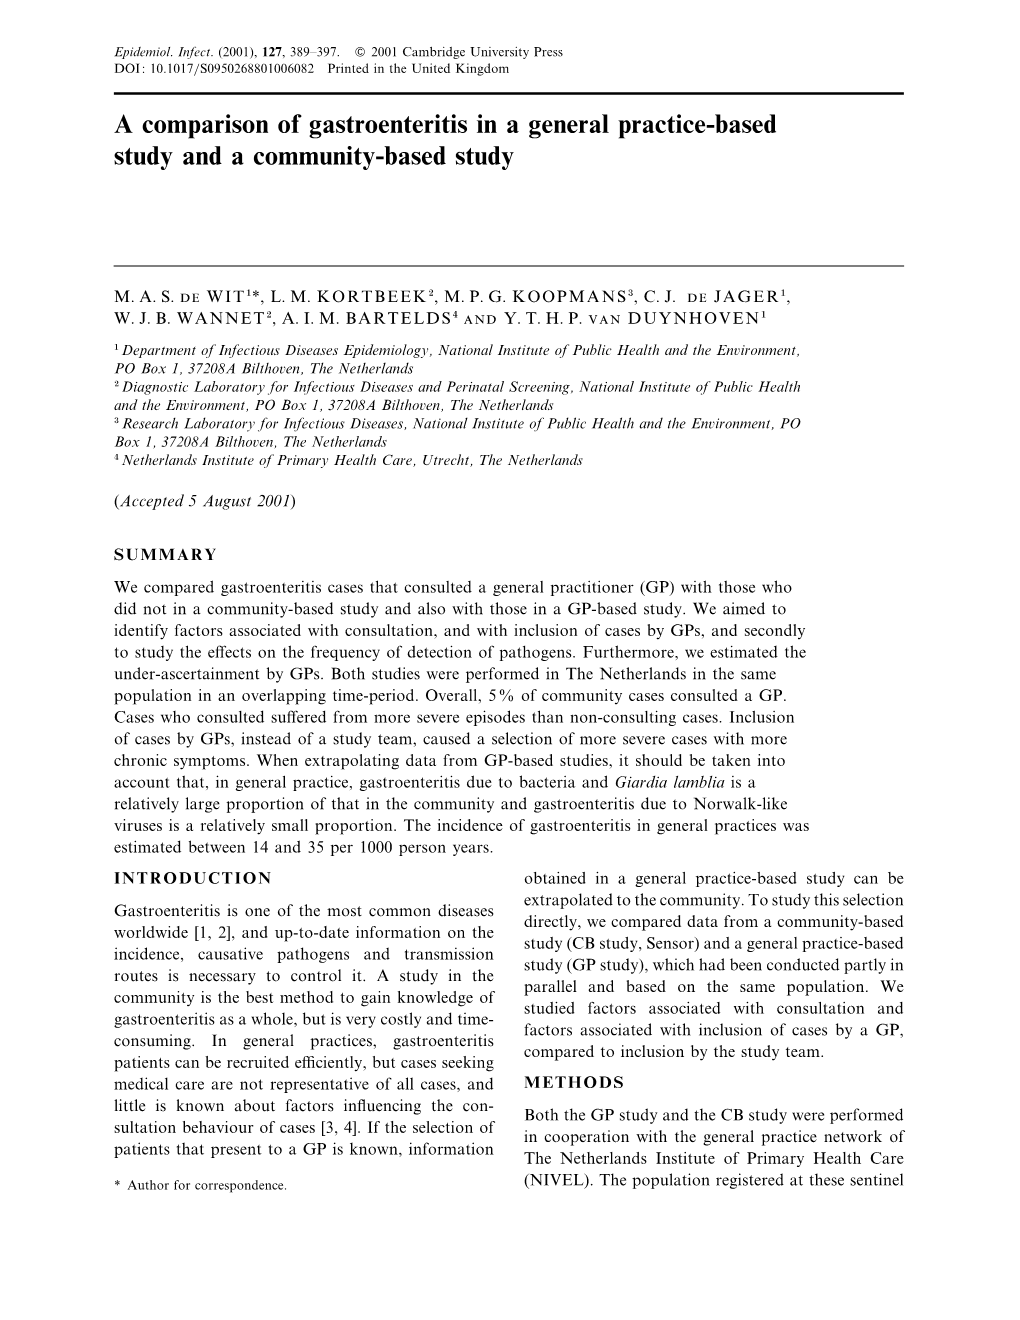 A Comparison of Gastroenteritis in a General Practice-Based Study and a Community-Based Study